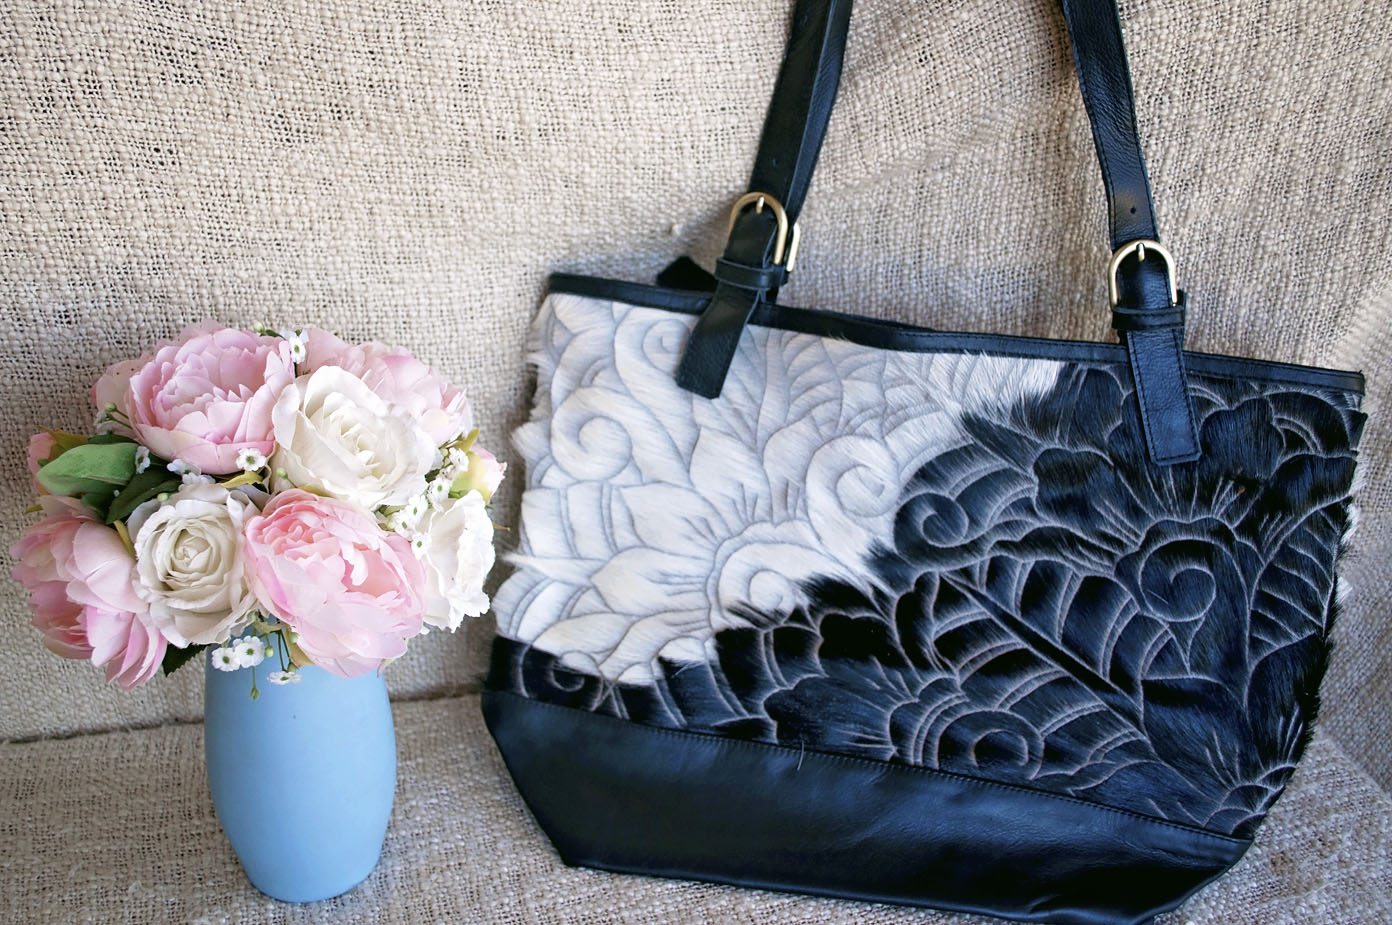 Toolong Tote ~ Black & White Carved Collection